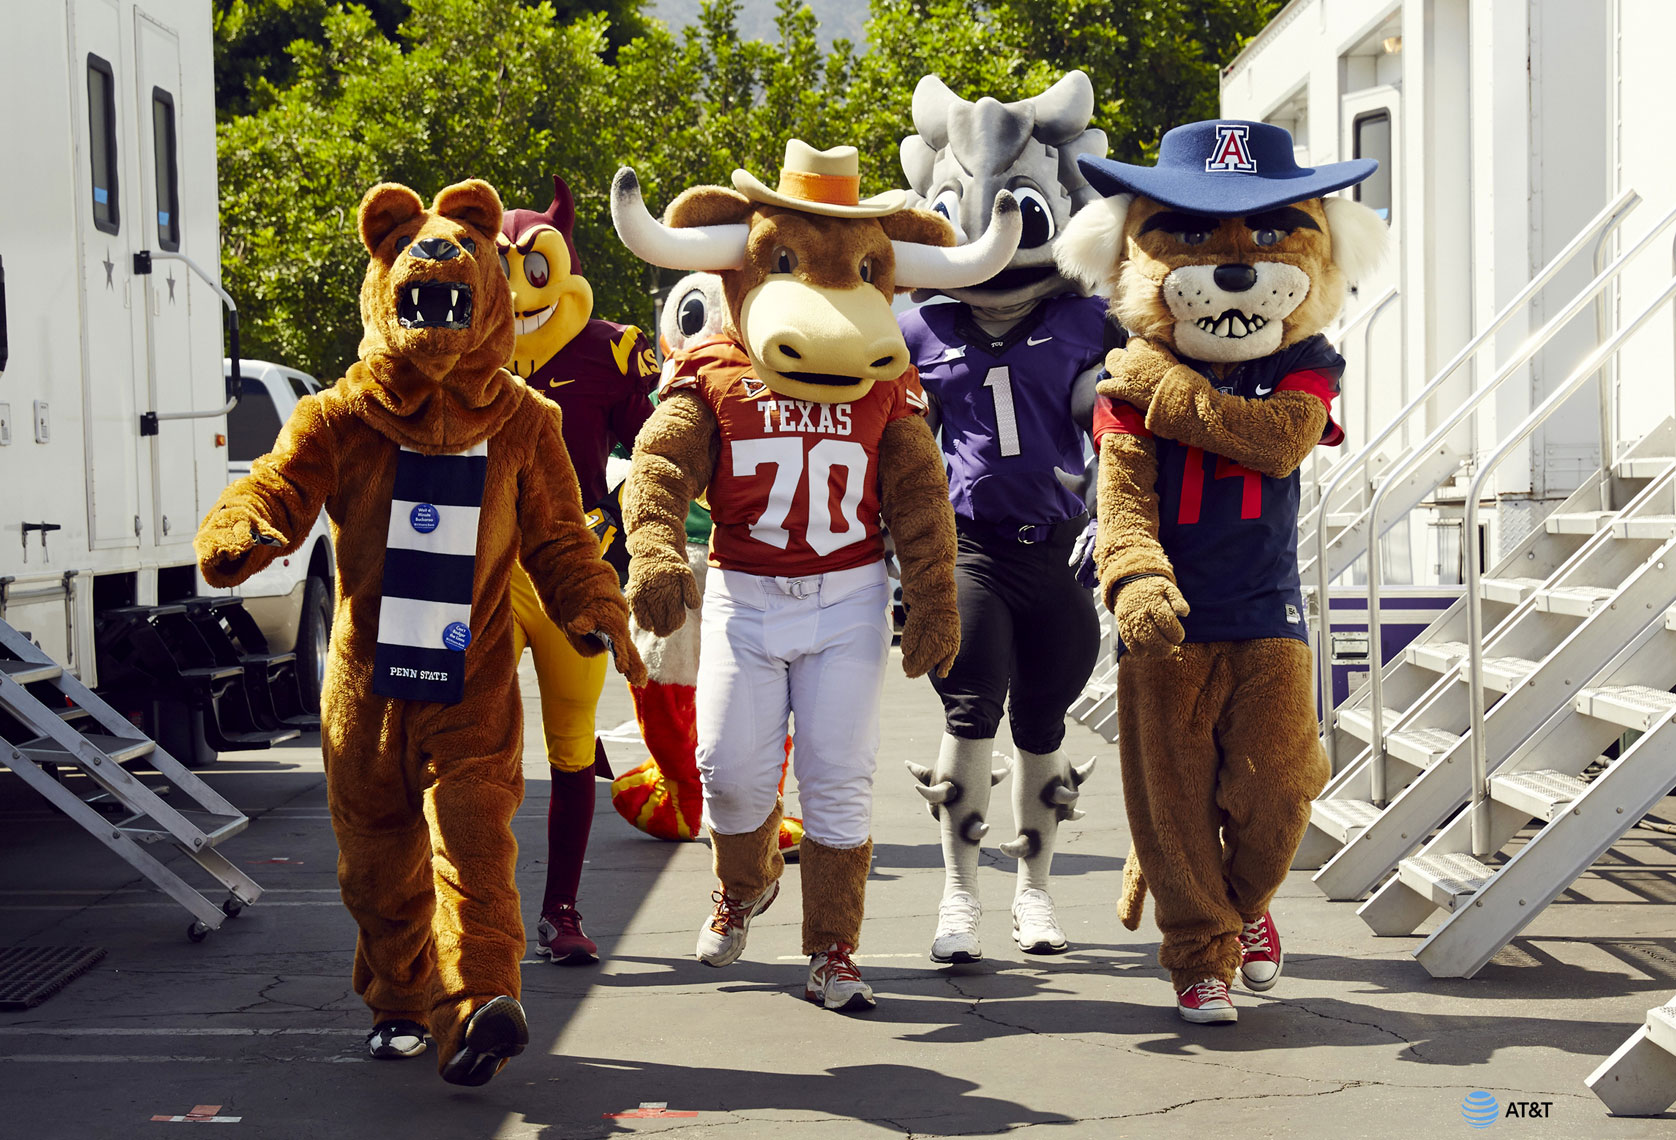 Commercial  Photography - Roger Snider - NCAA Mascots for AT&T - Los Angeles CA